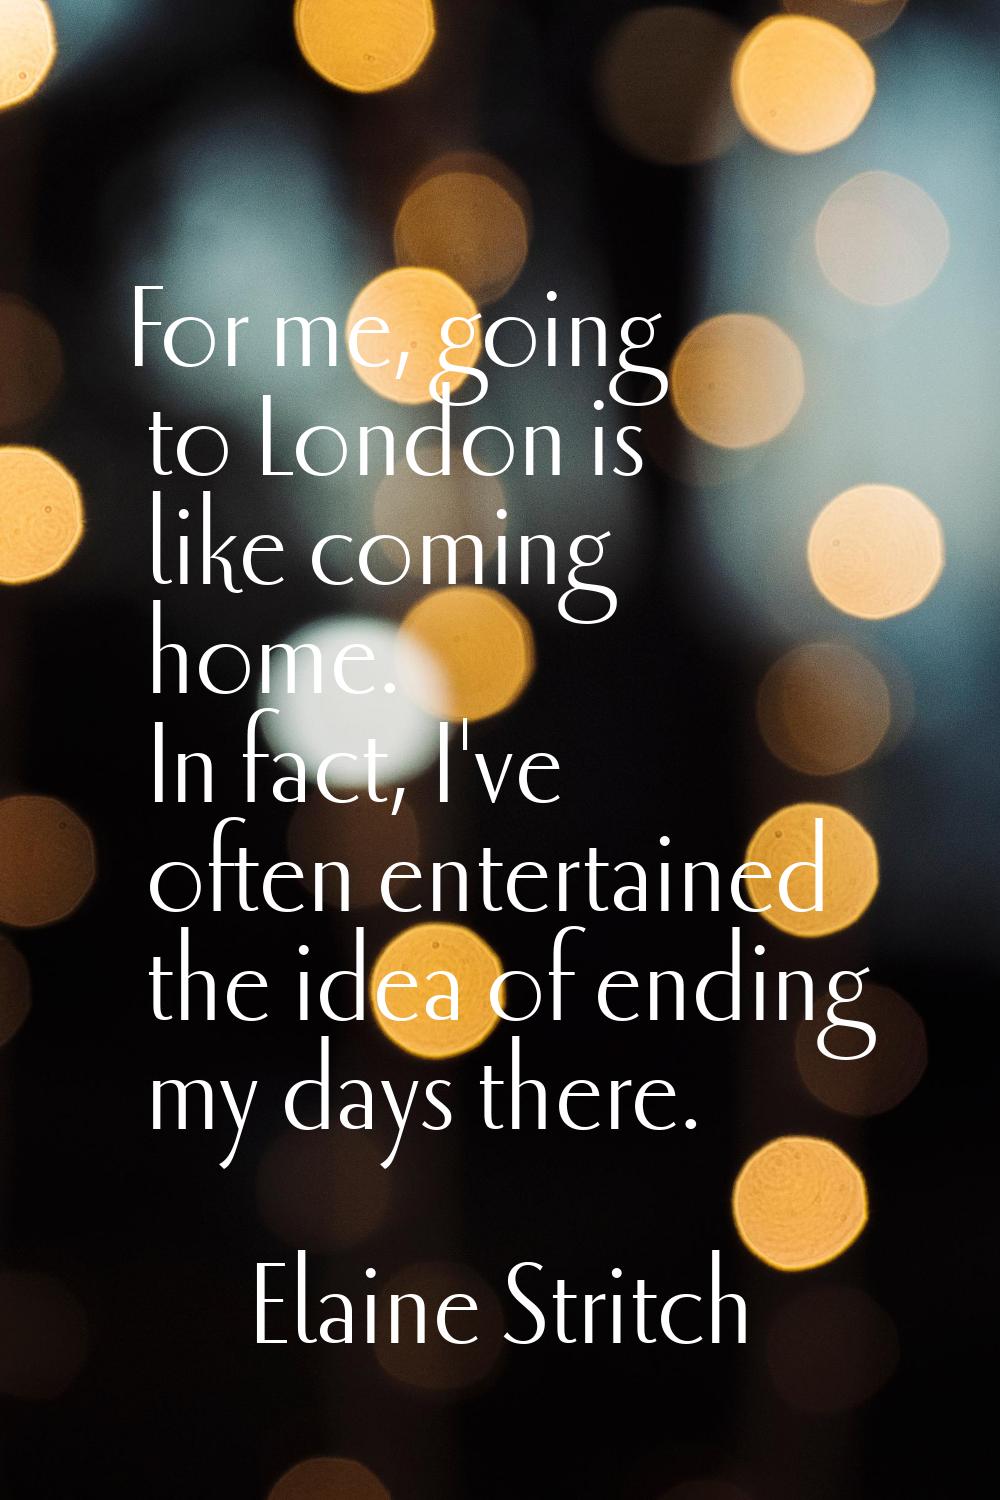 For me, going to London is like coming home. In fact, I've often entertained the idea of ending my 